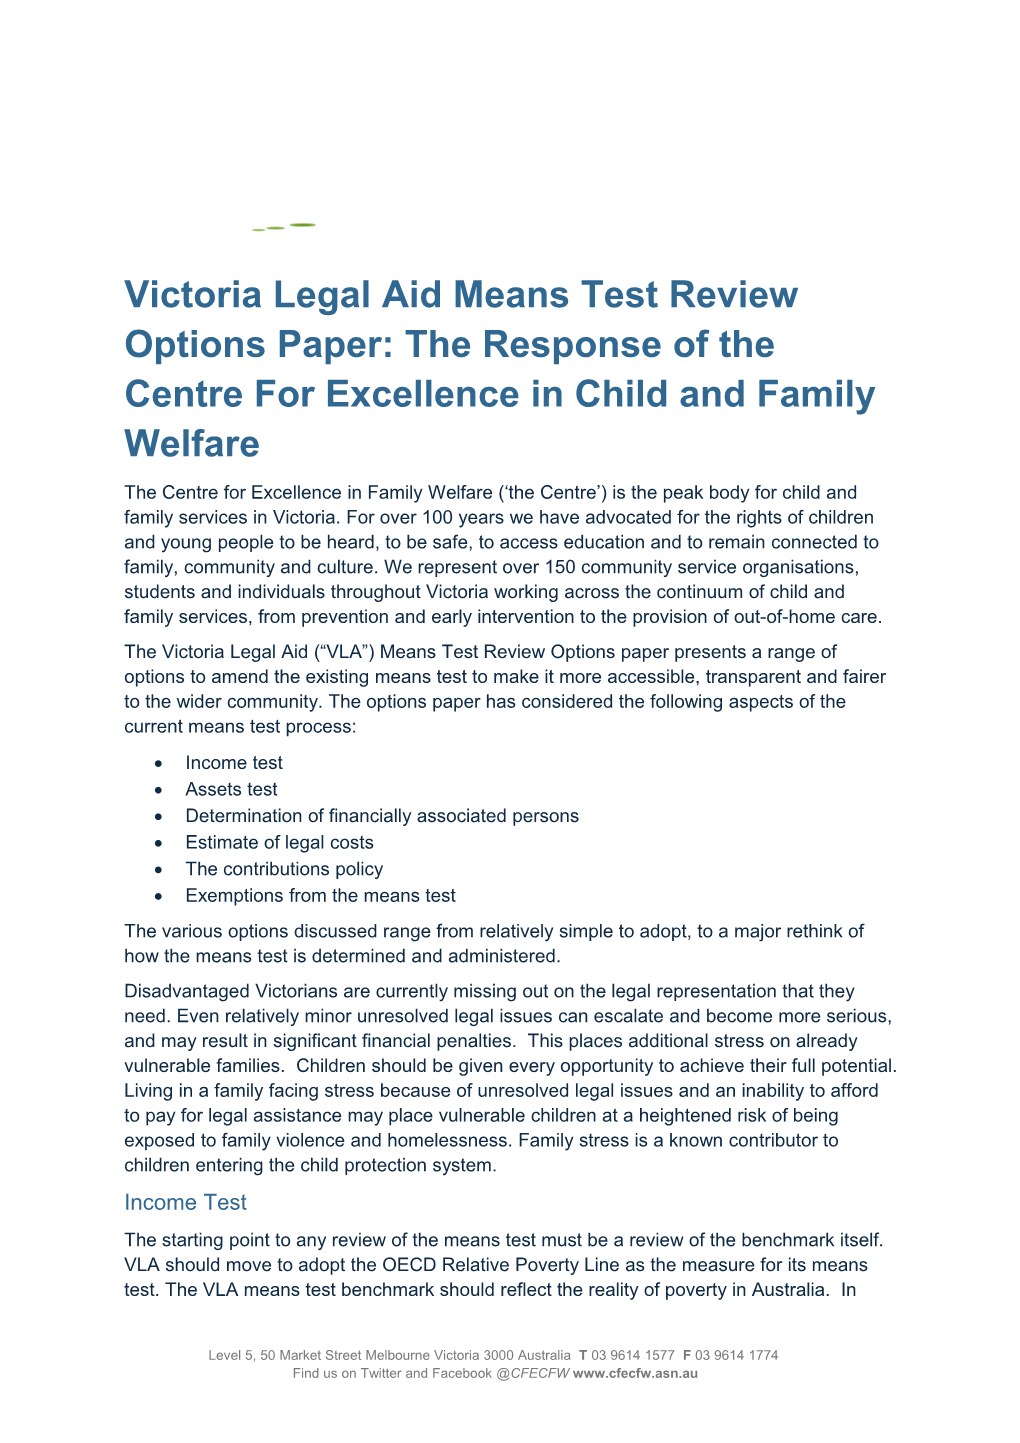 Victoria Legal Aid Means Test Review Options Paper: the Response of the Centre for Excellence